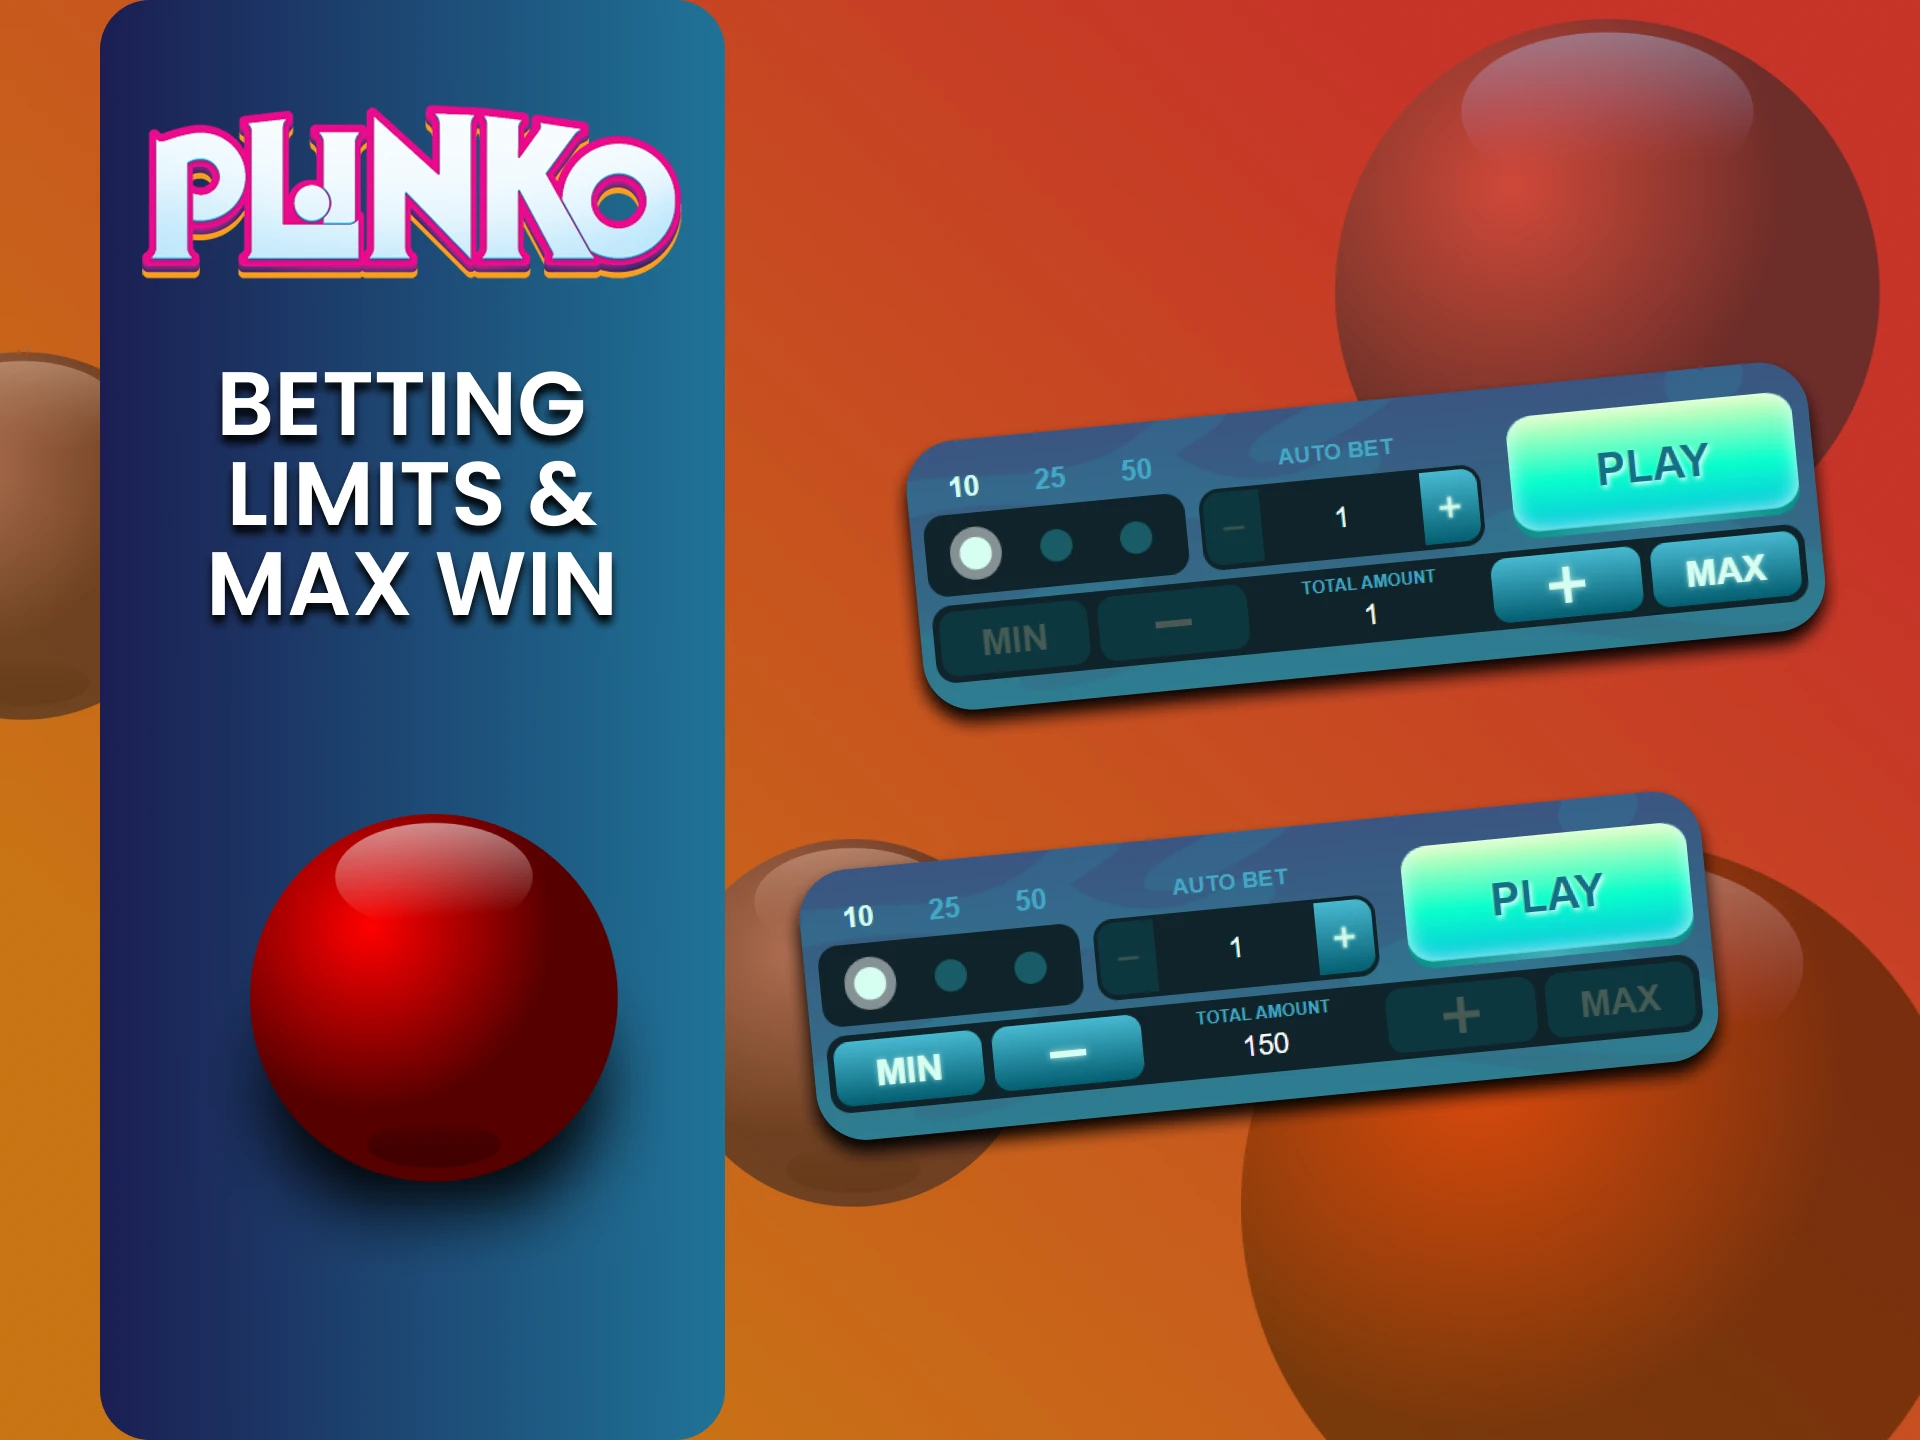 Find out about the betting limit in the Plinko game.